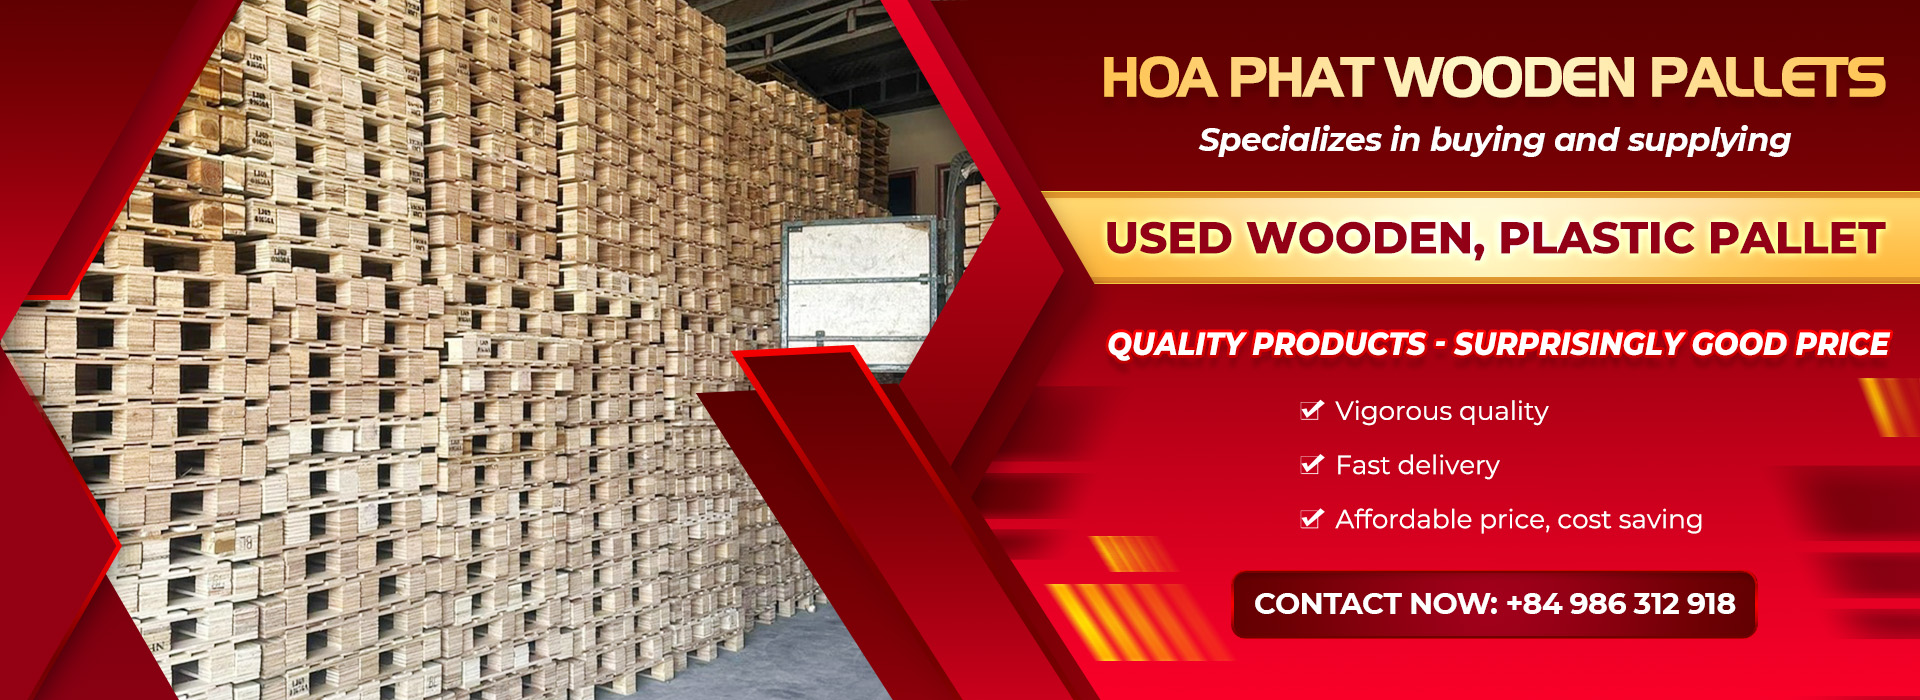 HOA PHAT WOODEN PALLET ONE MEMBER COMPANY LIMITED